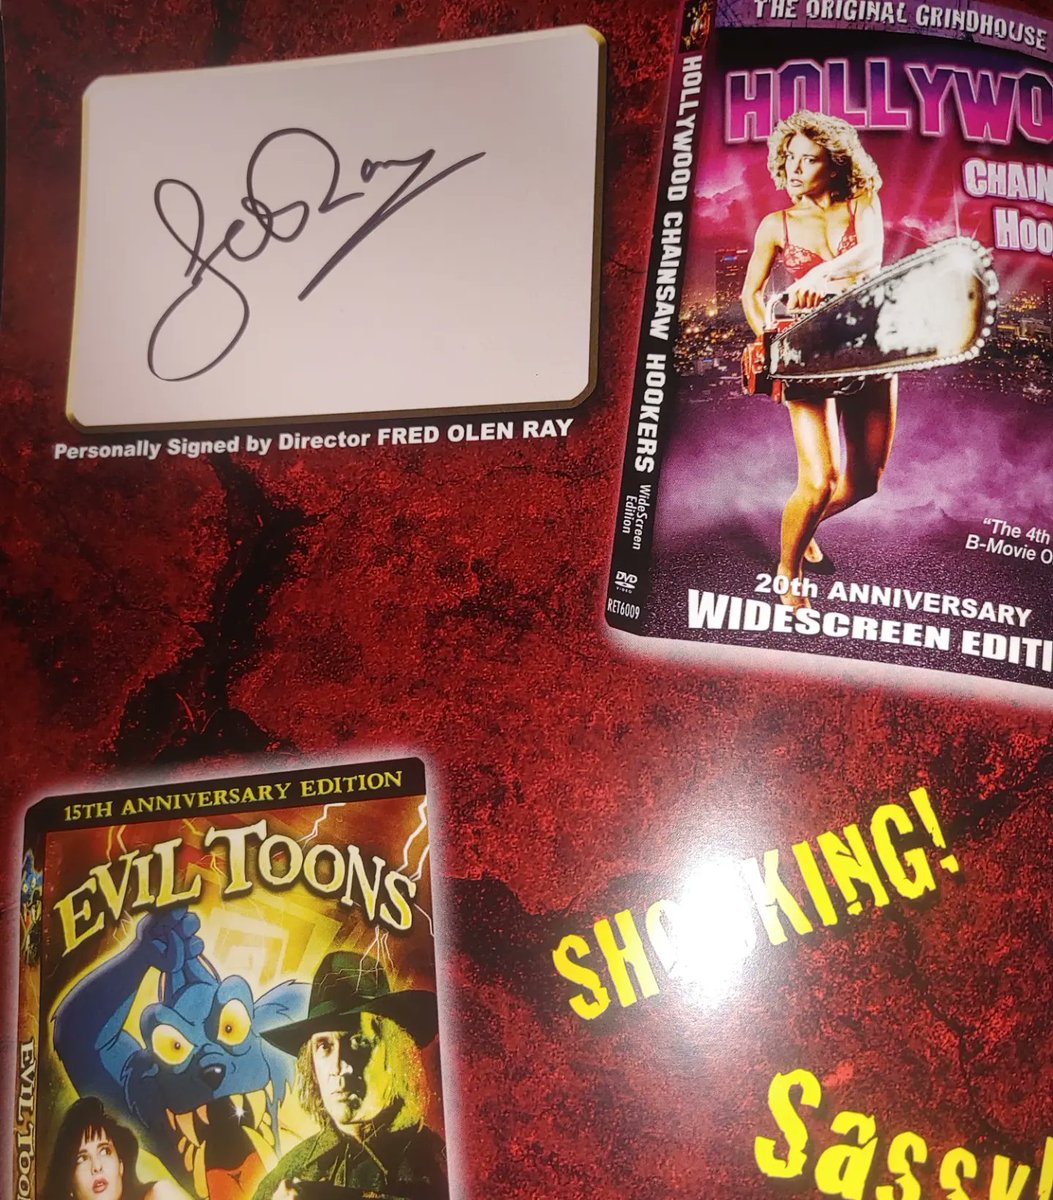 I've put in 70 hrs at work this week and still got a day to go.  But put smile on my face to come home to see #fredolenray autographed copy of #Hollywoodchainsawhookers comic book from #retromedia comics arrived #cultfilm #linneaquigley #horror #chainsaw #MutantFam #comicbook